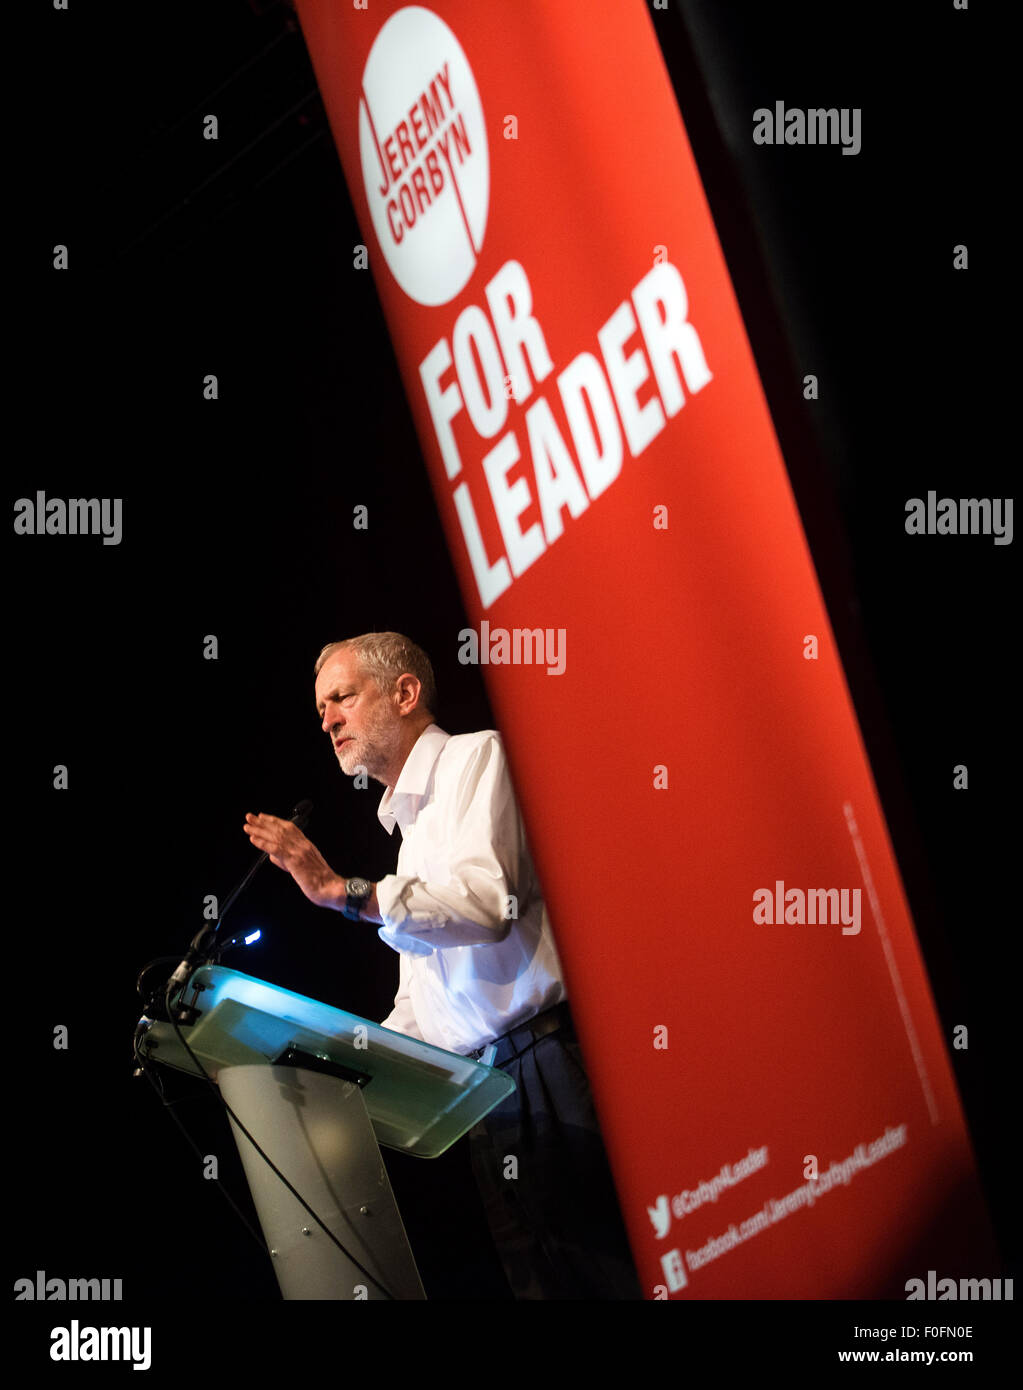 Glasgow, Scotland, UK. 14th Aug, 2015. Labour Leadership candidate Jeremy Corbyn delivers a speech during his campaign in Scotland at the Old Fruitmarket in Glasgow on August 14, 2015 in Edinburgh Scotland. Labour leadership candidate Jeremy Corbyn is holding rallies in cities across Scotland. Credit:  Sam Kovak/Alamy Live News Stock Photo